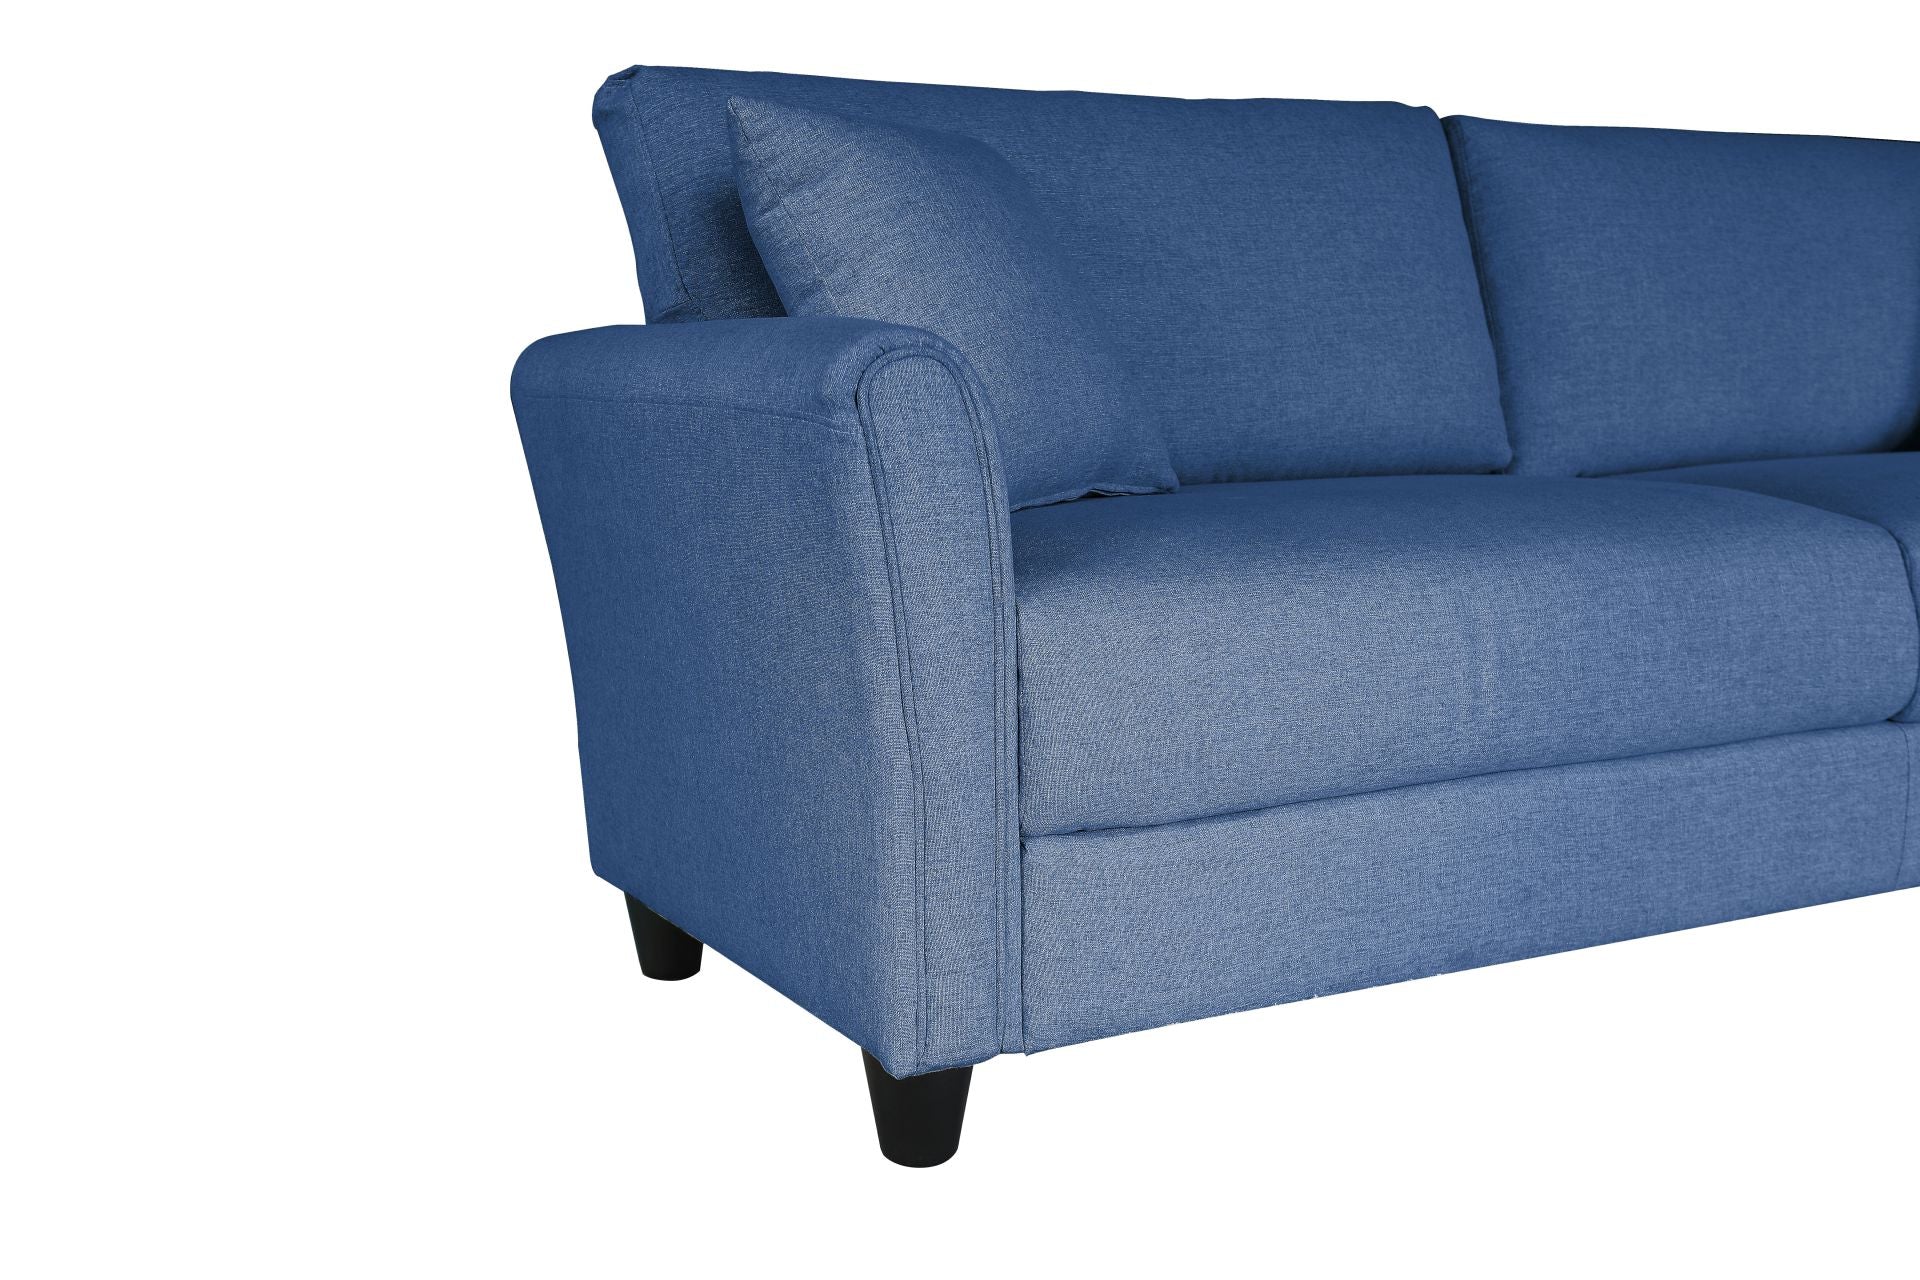 ZNTS Blue Linen, Three-person Indoor Sofa, Two Throw Pillows, Solid Wood Frame, Plastic Feet 06584591